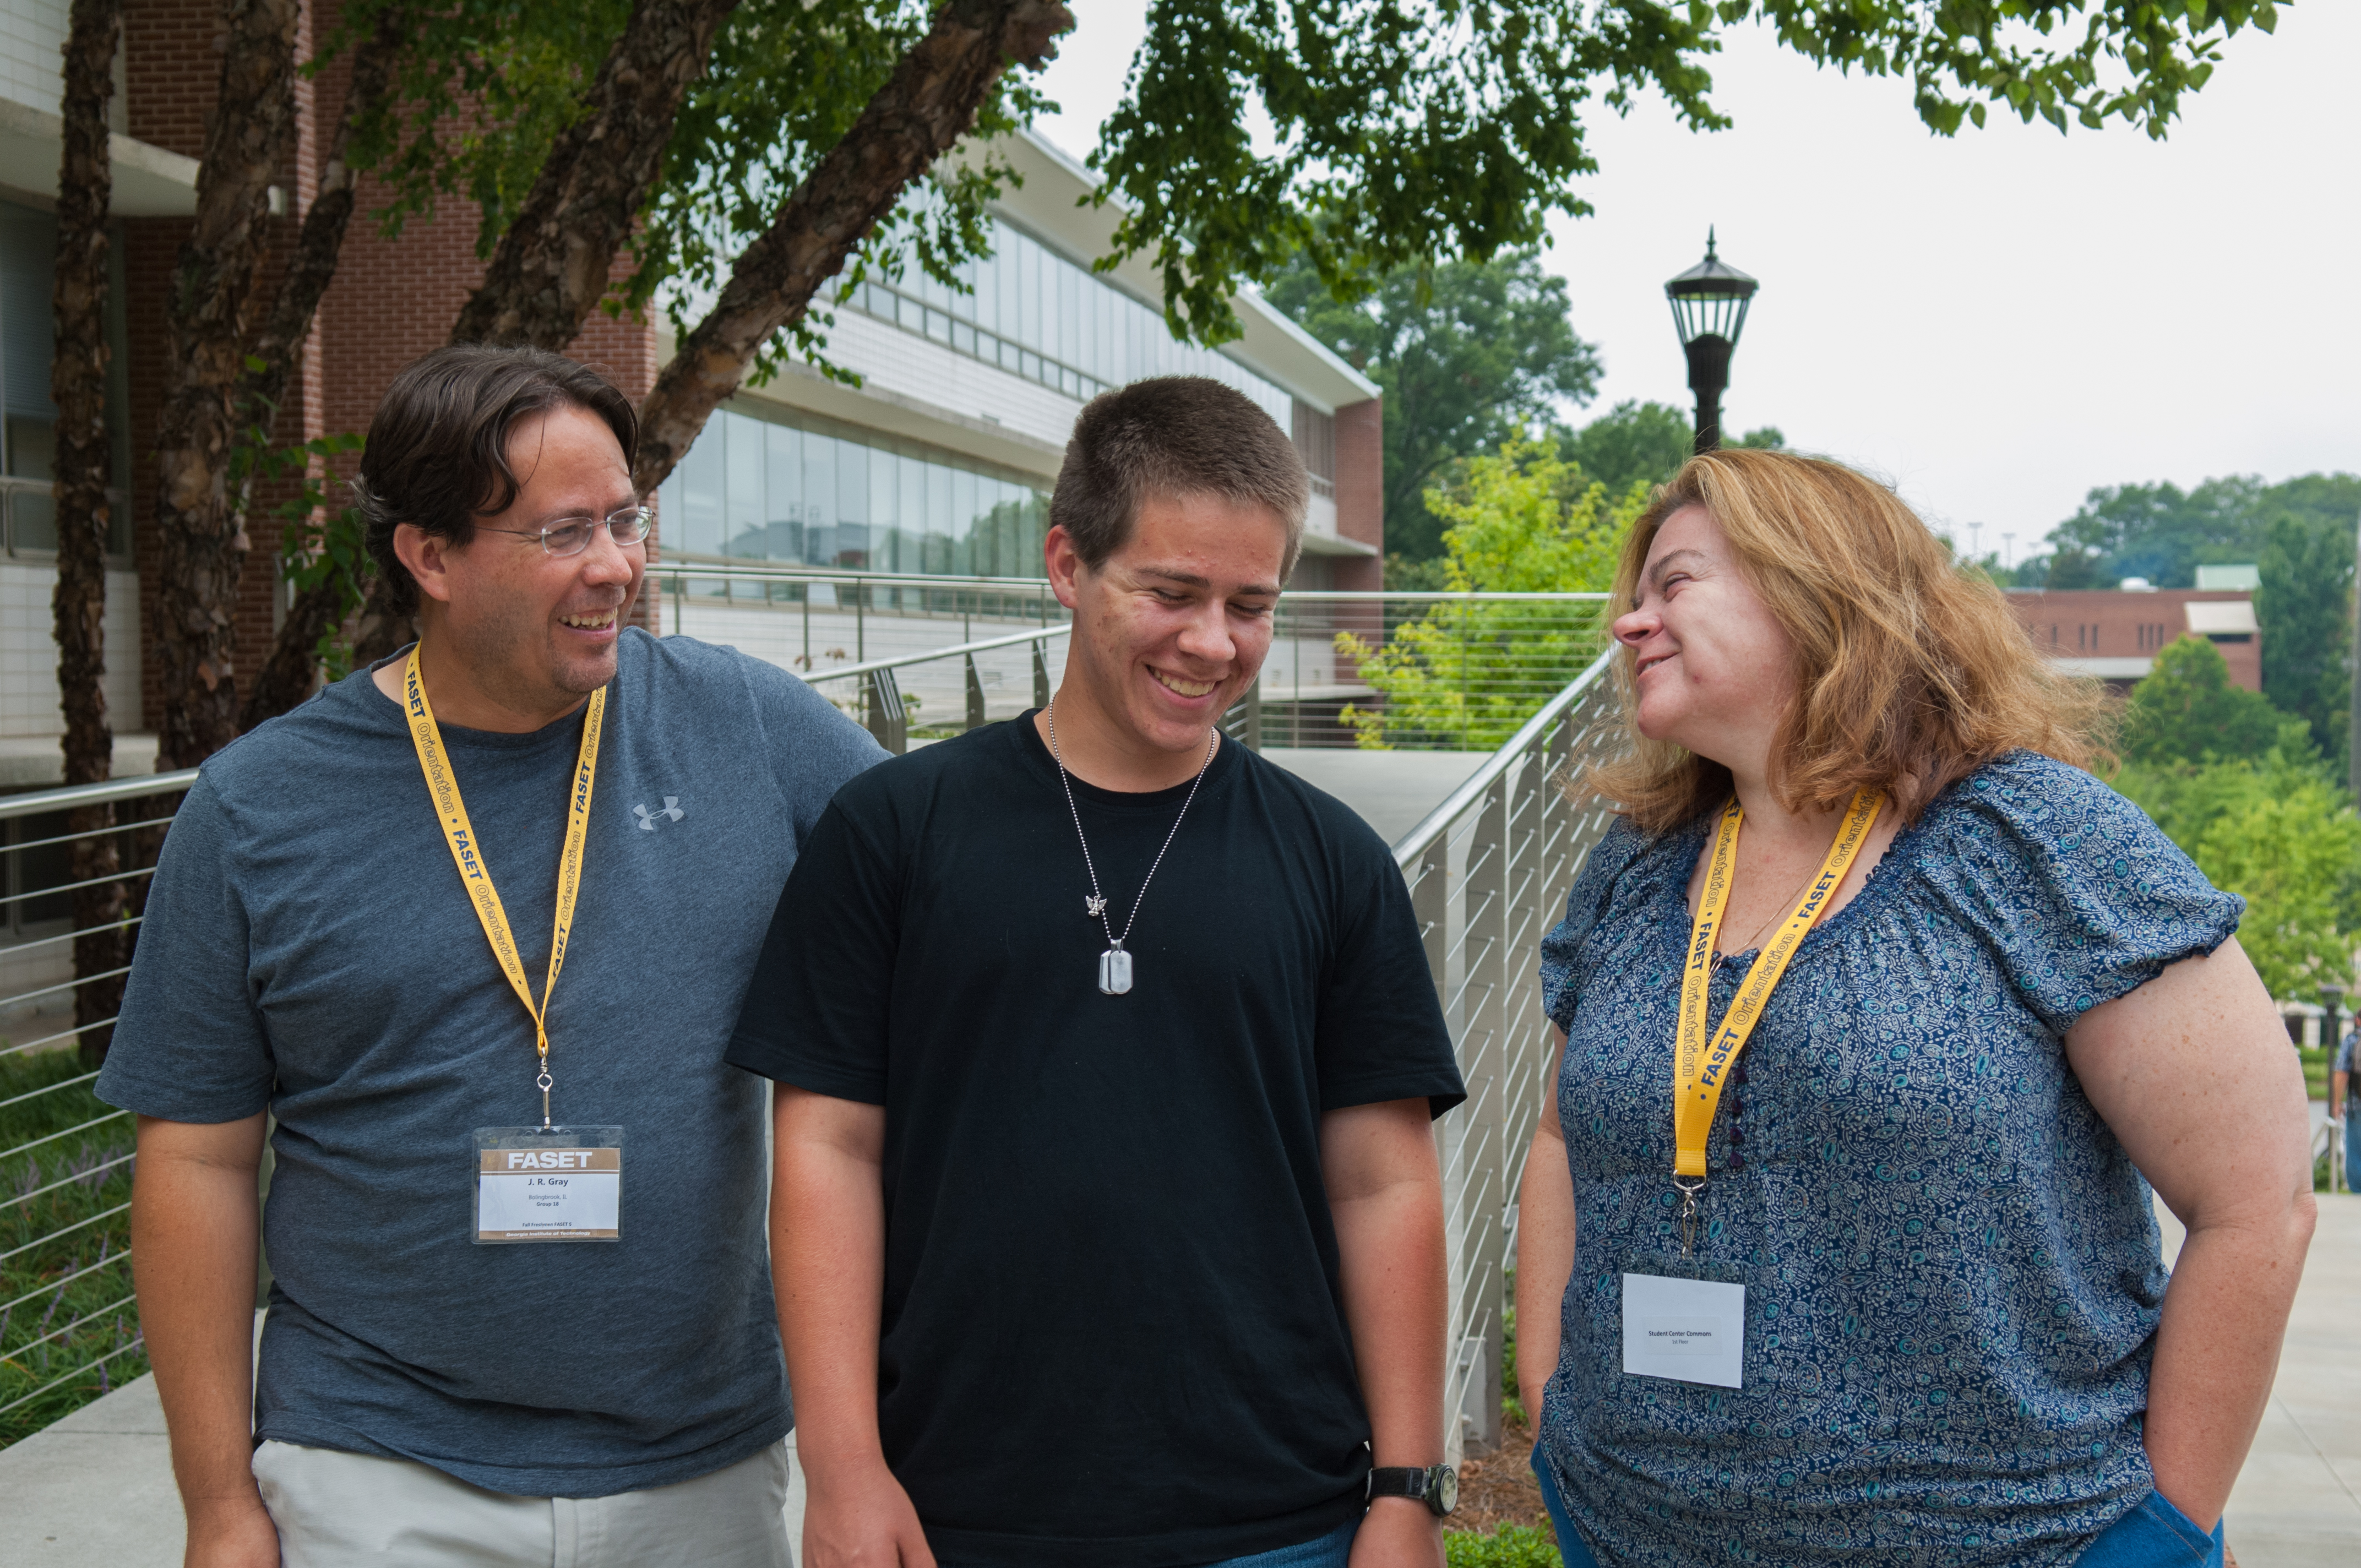 Thomas Gray (center) is starting at Georgia Tech 23 years after his parents both graduated. J.R. and Janie Gray (left and right) met as undergraduates on campus.